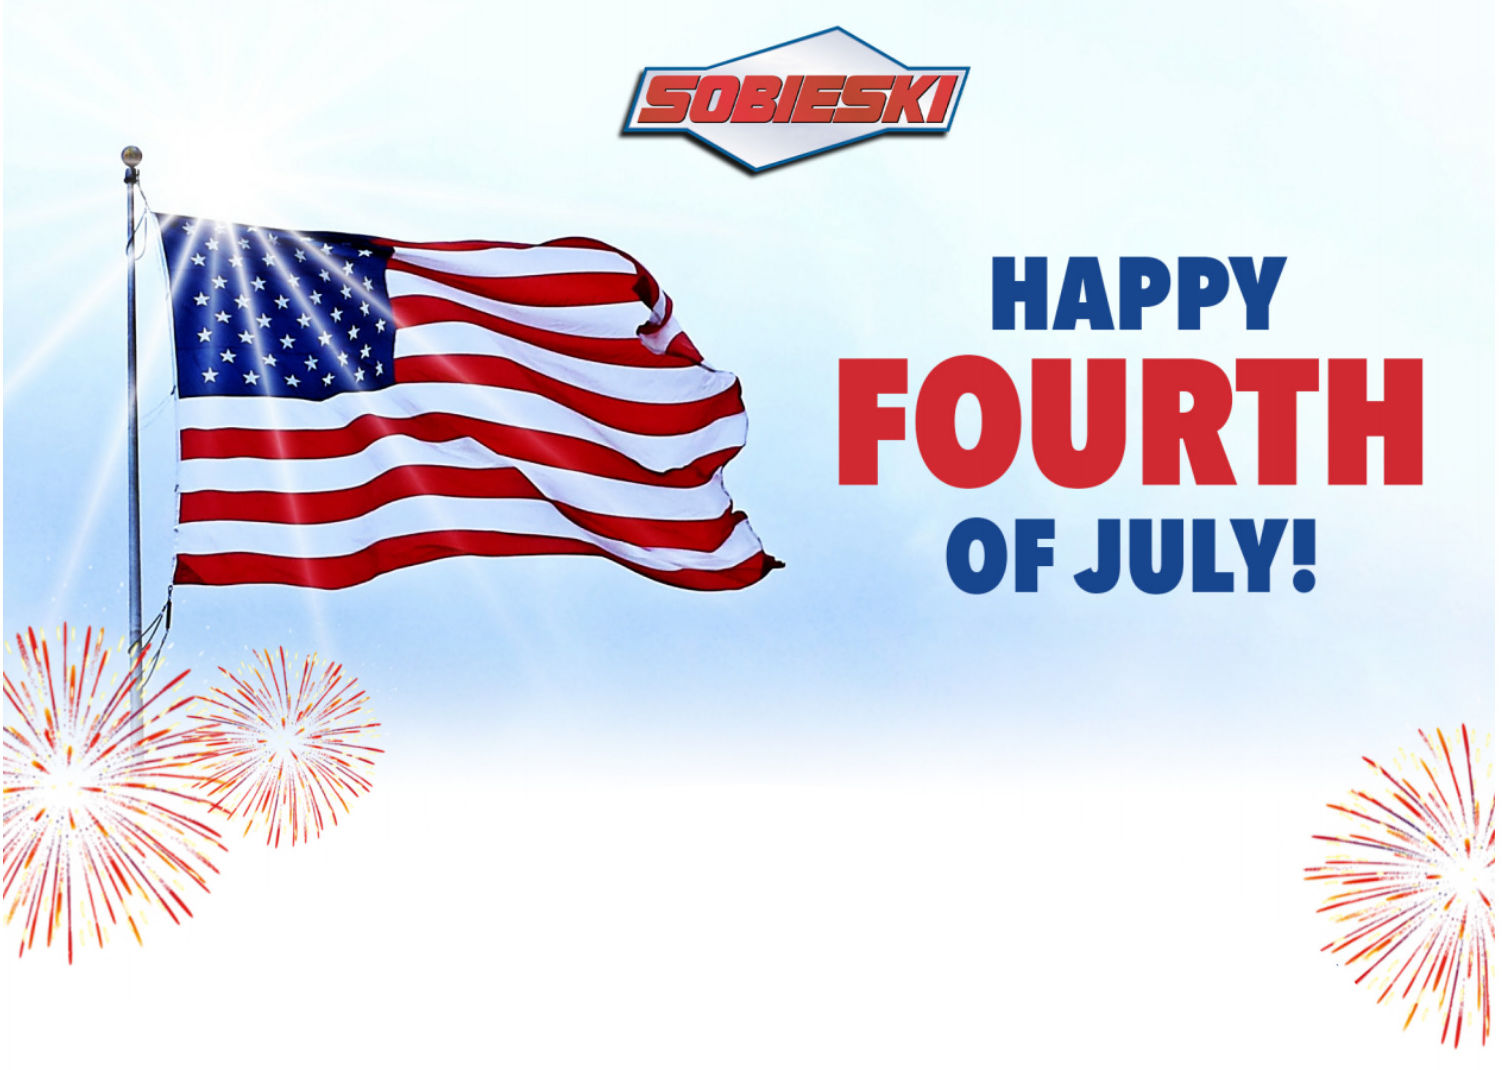 Happy Fourth of July from Sobieski Services!